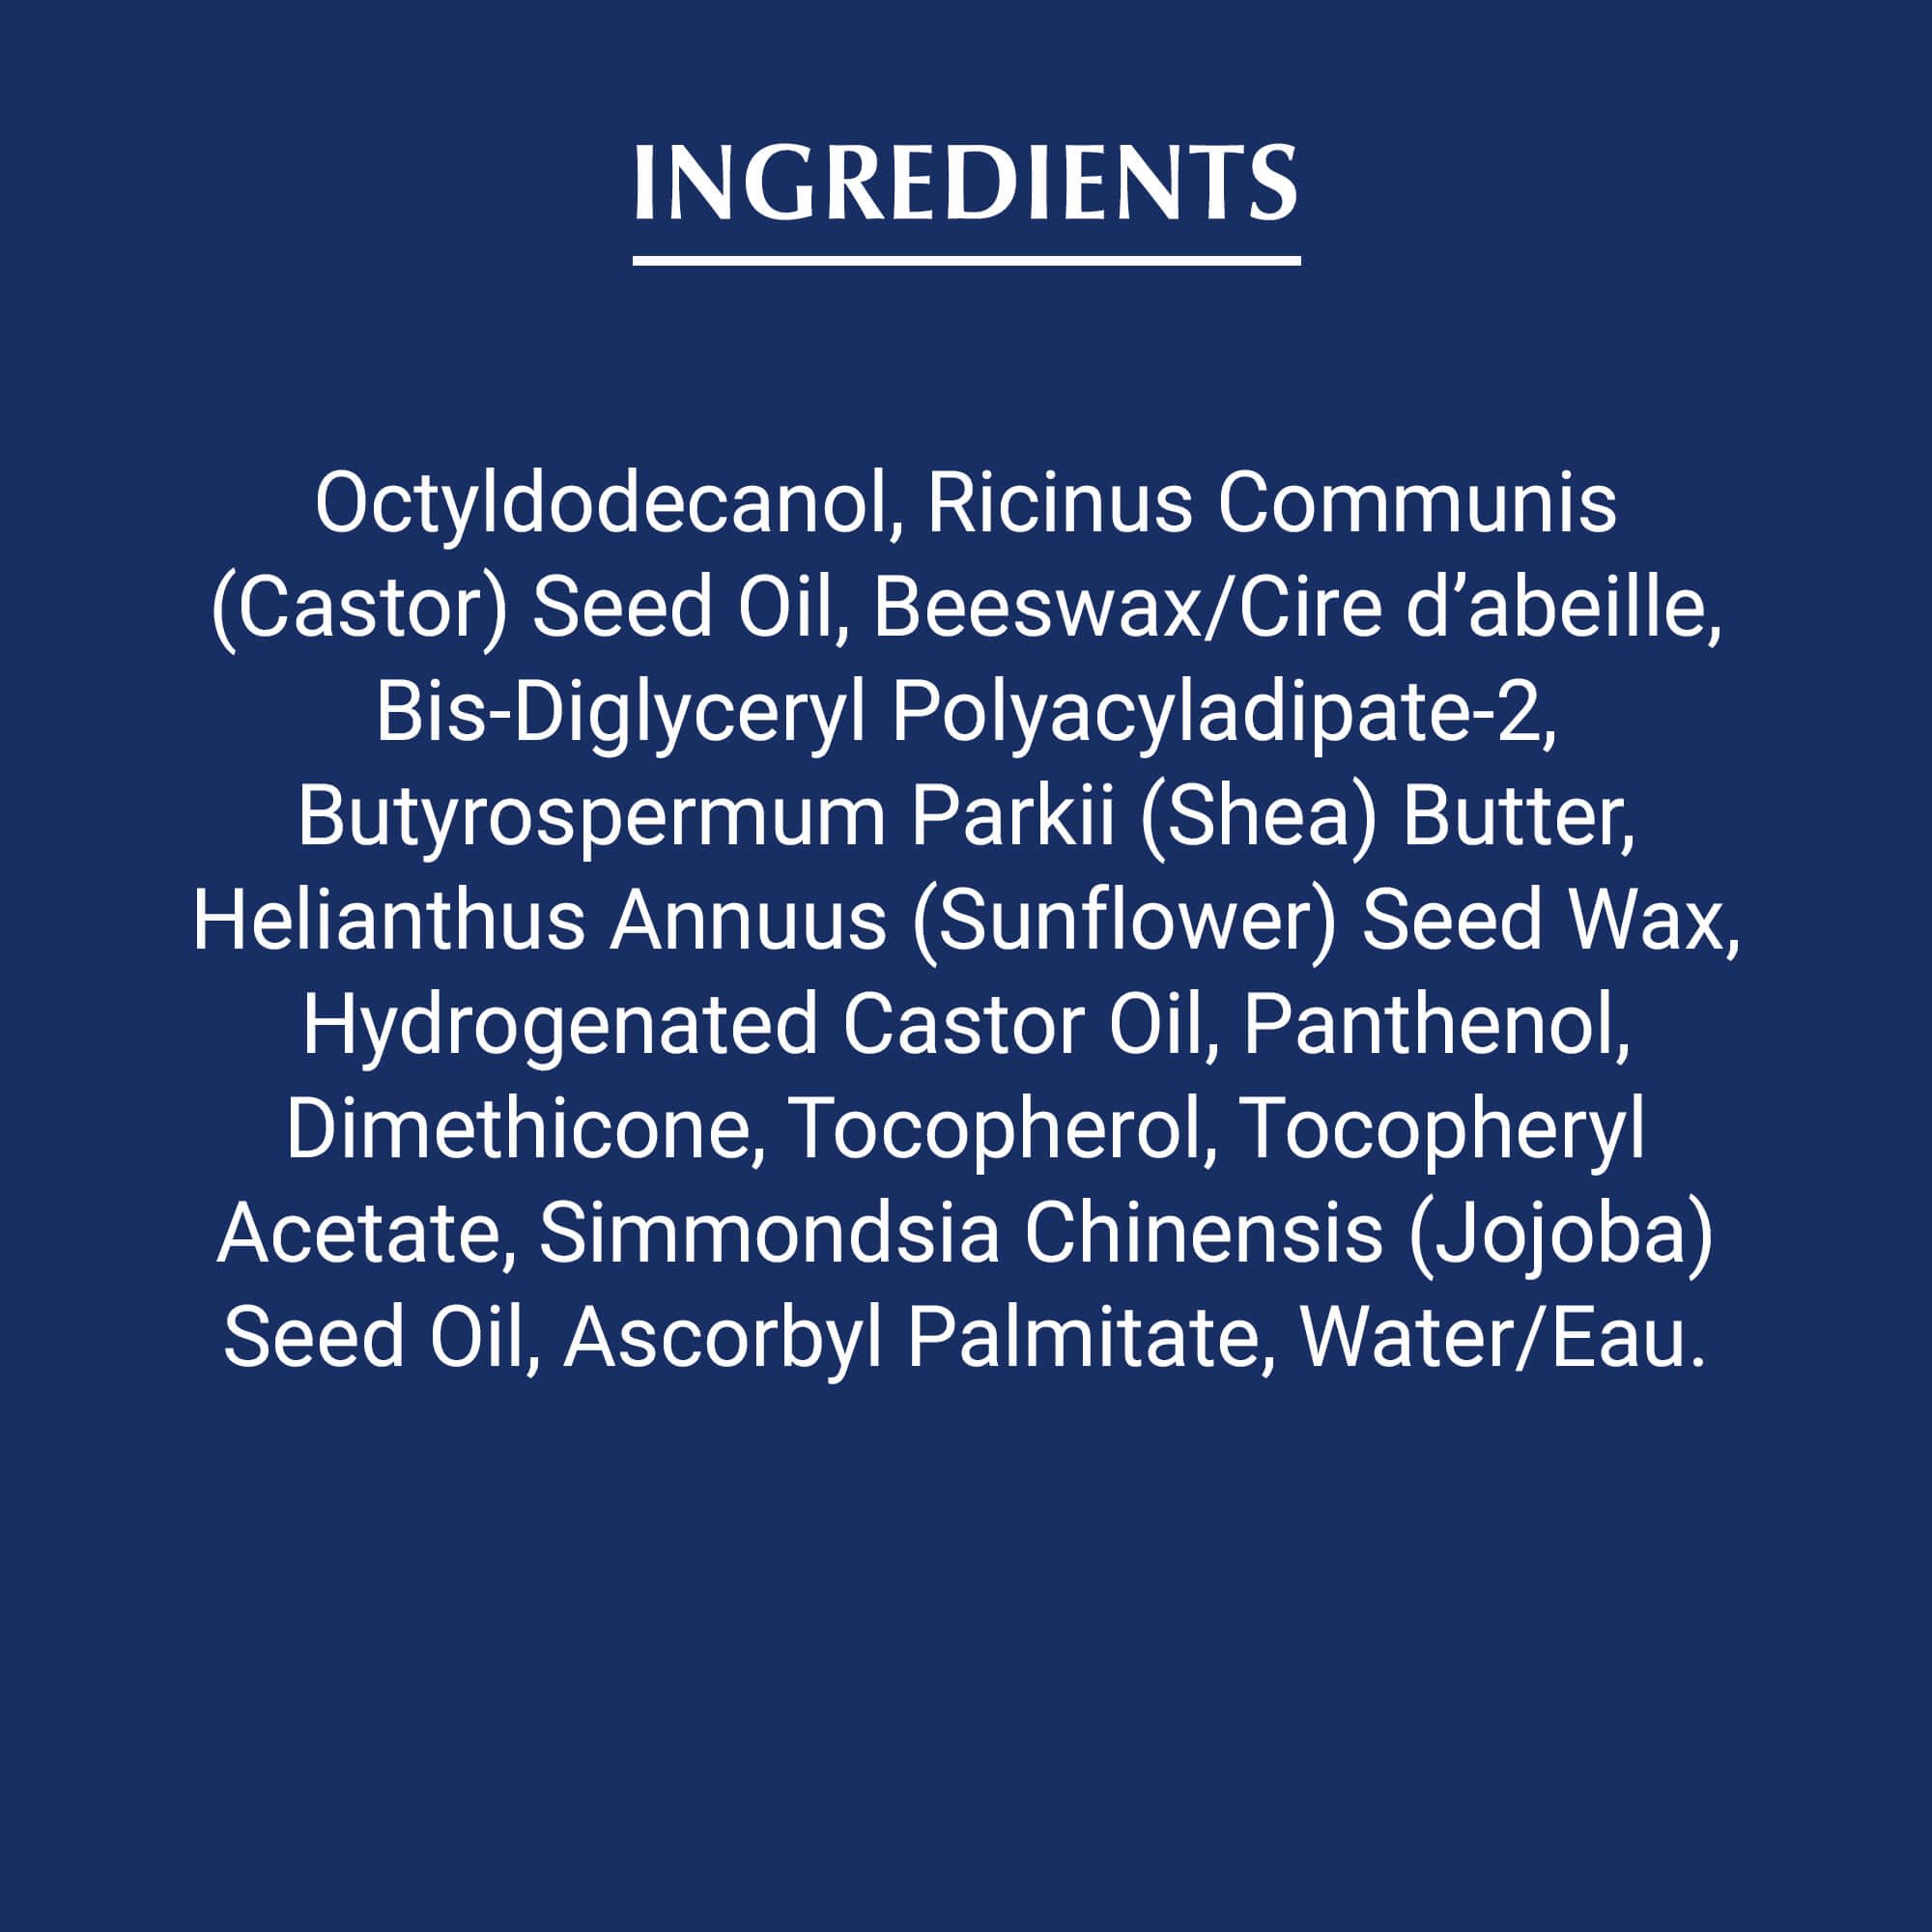 View of Aquaphor lip repair stick product ingredients list on blue background.